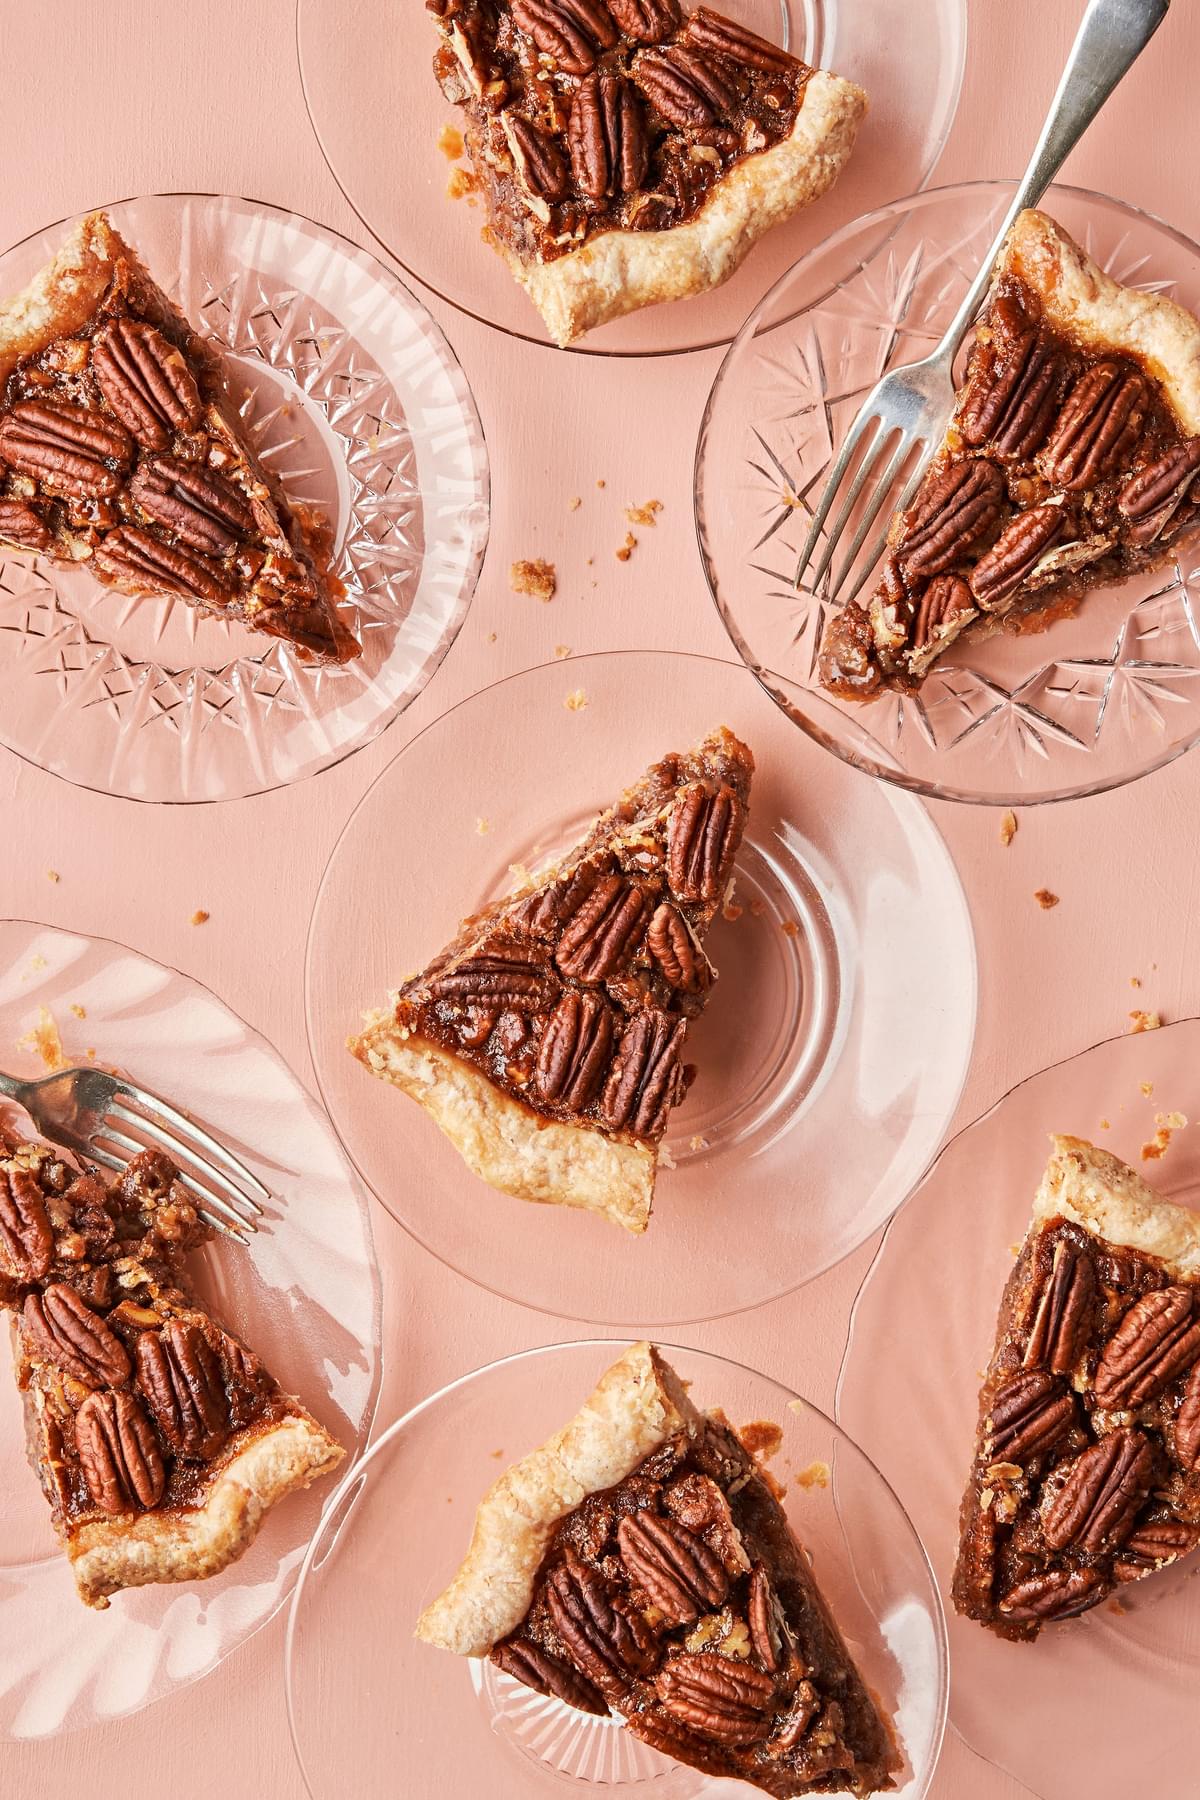 a slices of bourbon pecan pie made with brown sugar, corn syrup, cinnamon, butter and vanilla on dessert plates